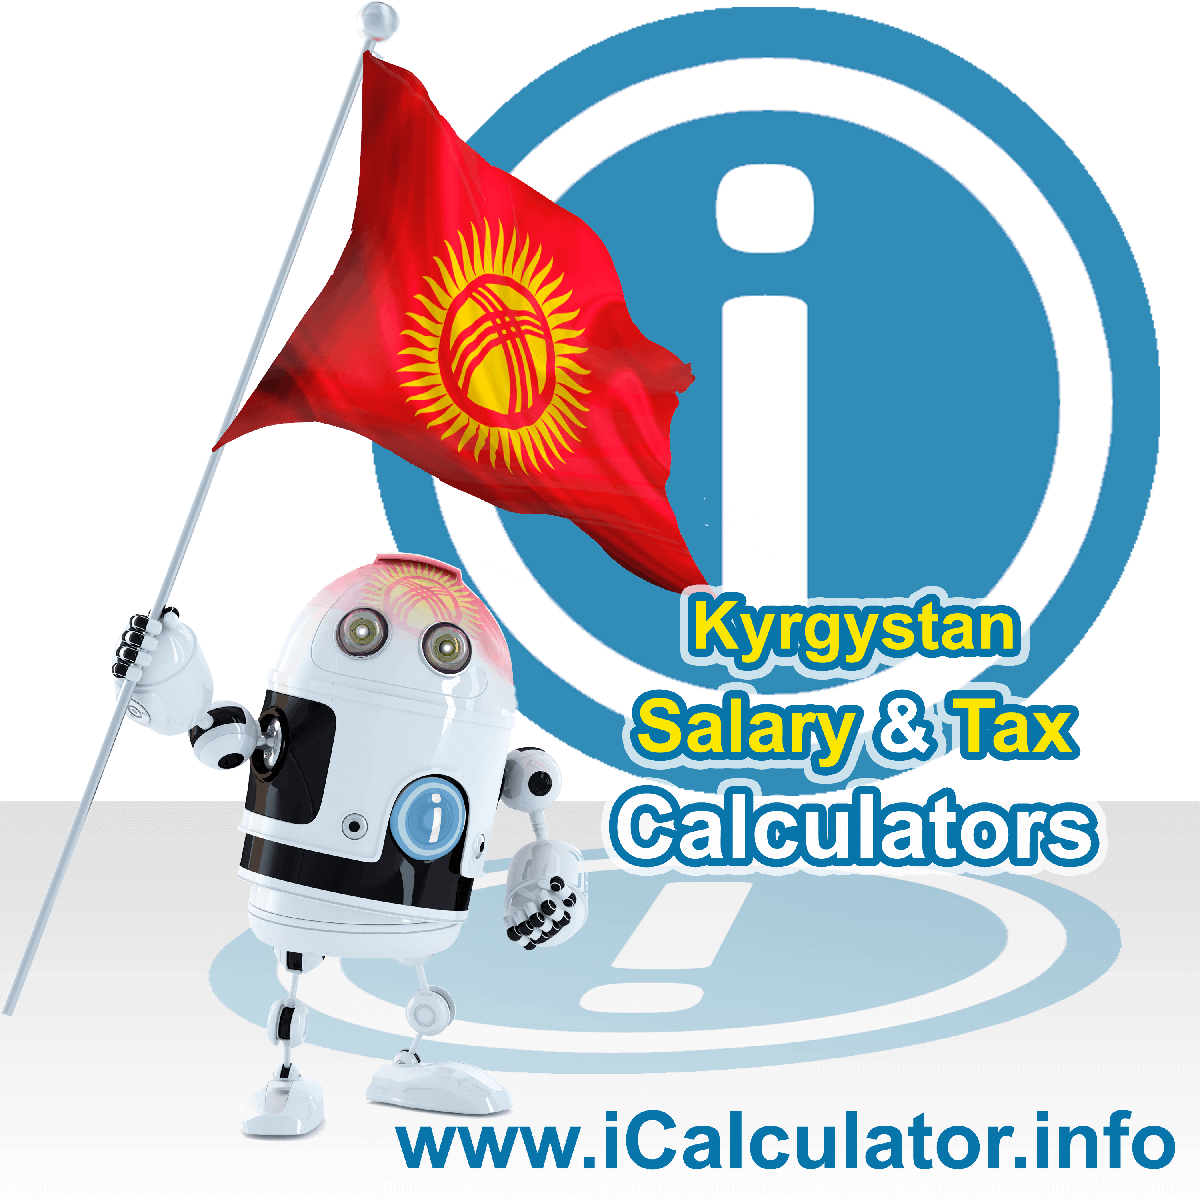 Kyrgyzstan Tax Calculator. This image shows the Kyrgyzstan flag and information relating to the tax formula for the Kyrgyzstan Salary Calculator